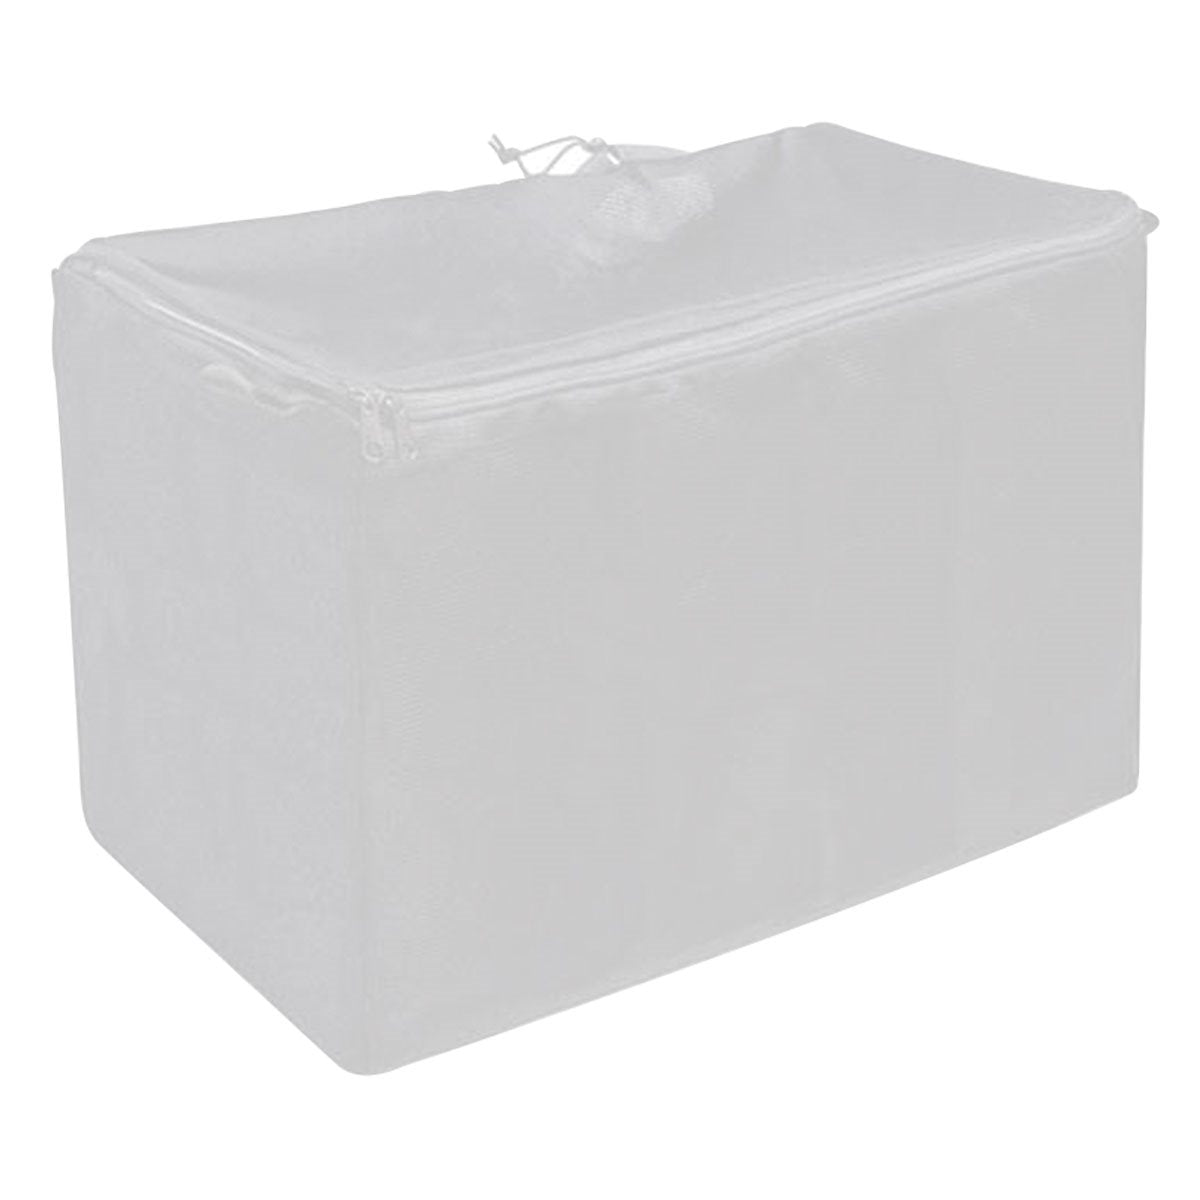 Product Image:Twister T4 Leaf Collector Filter Bag Dry 40 Micron White